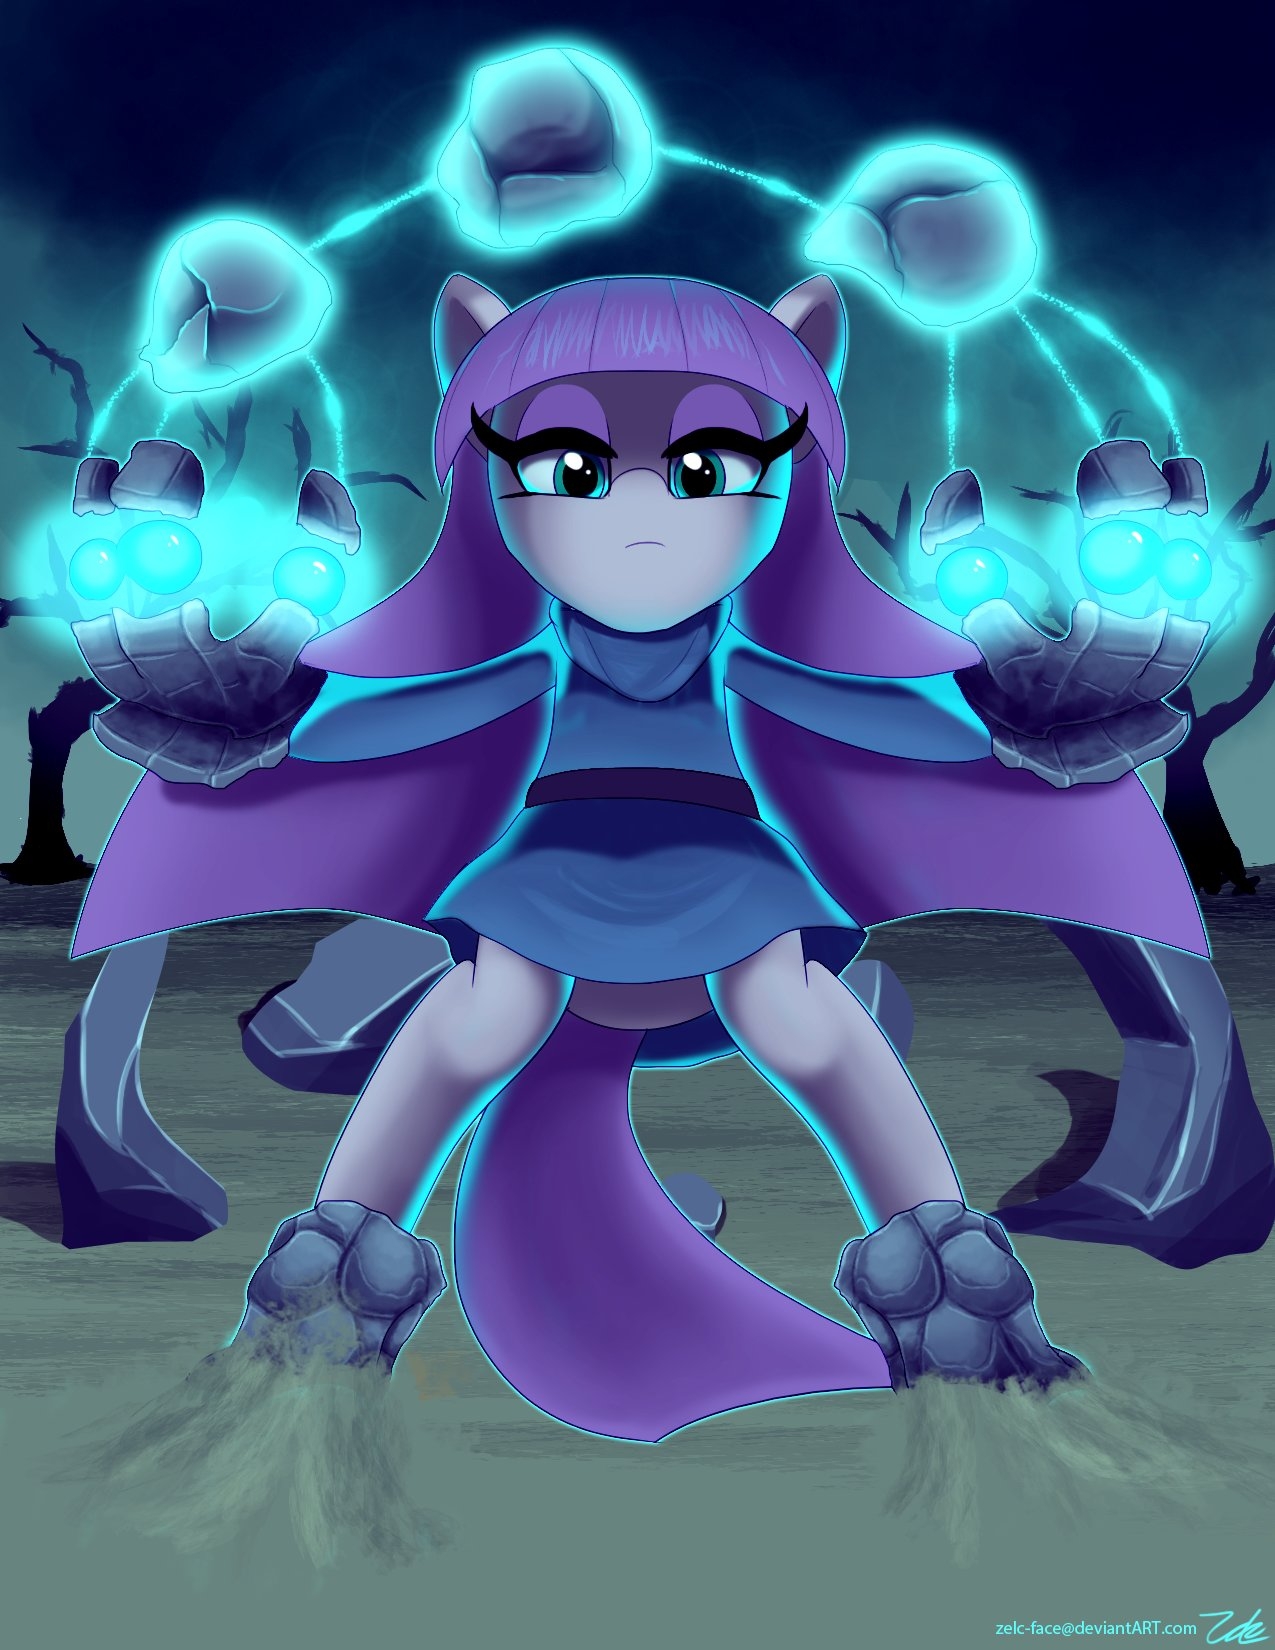 artist_zelc-face - Tags - Glimmerbooru - Where everypony is equal 84